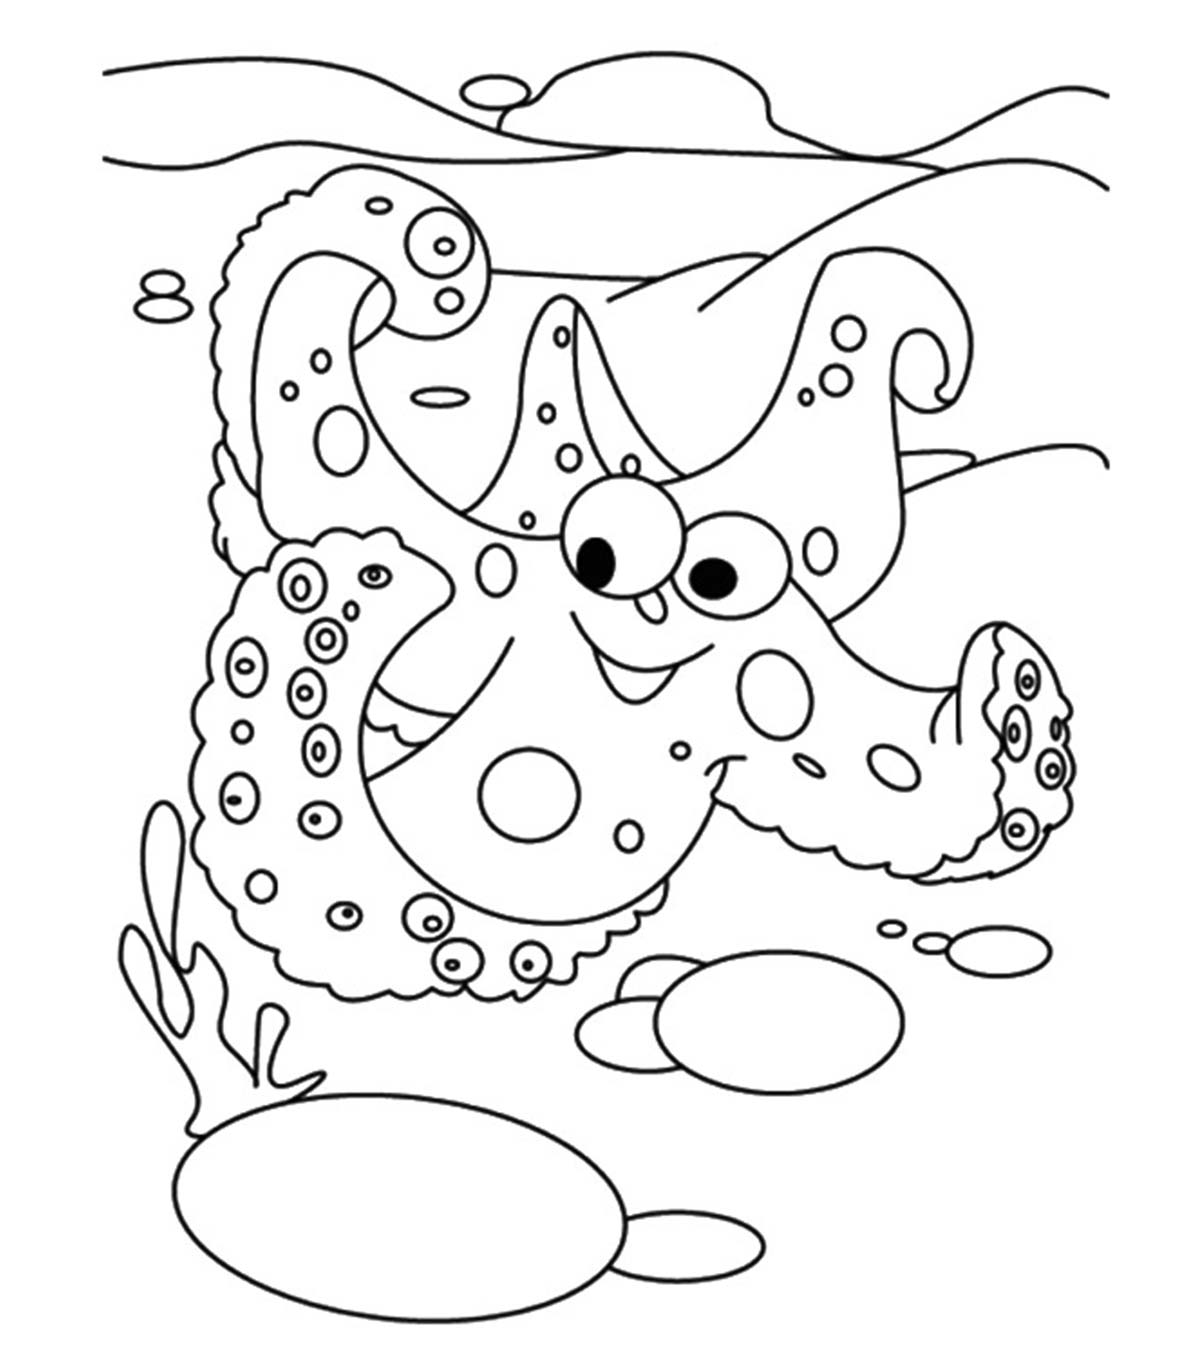 Top 10 Starfish Coloring Pages For Your Little Ones